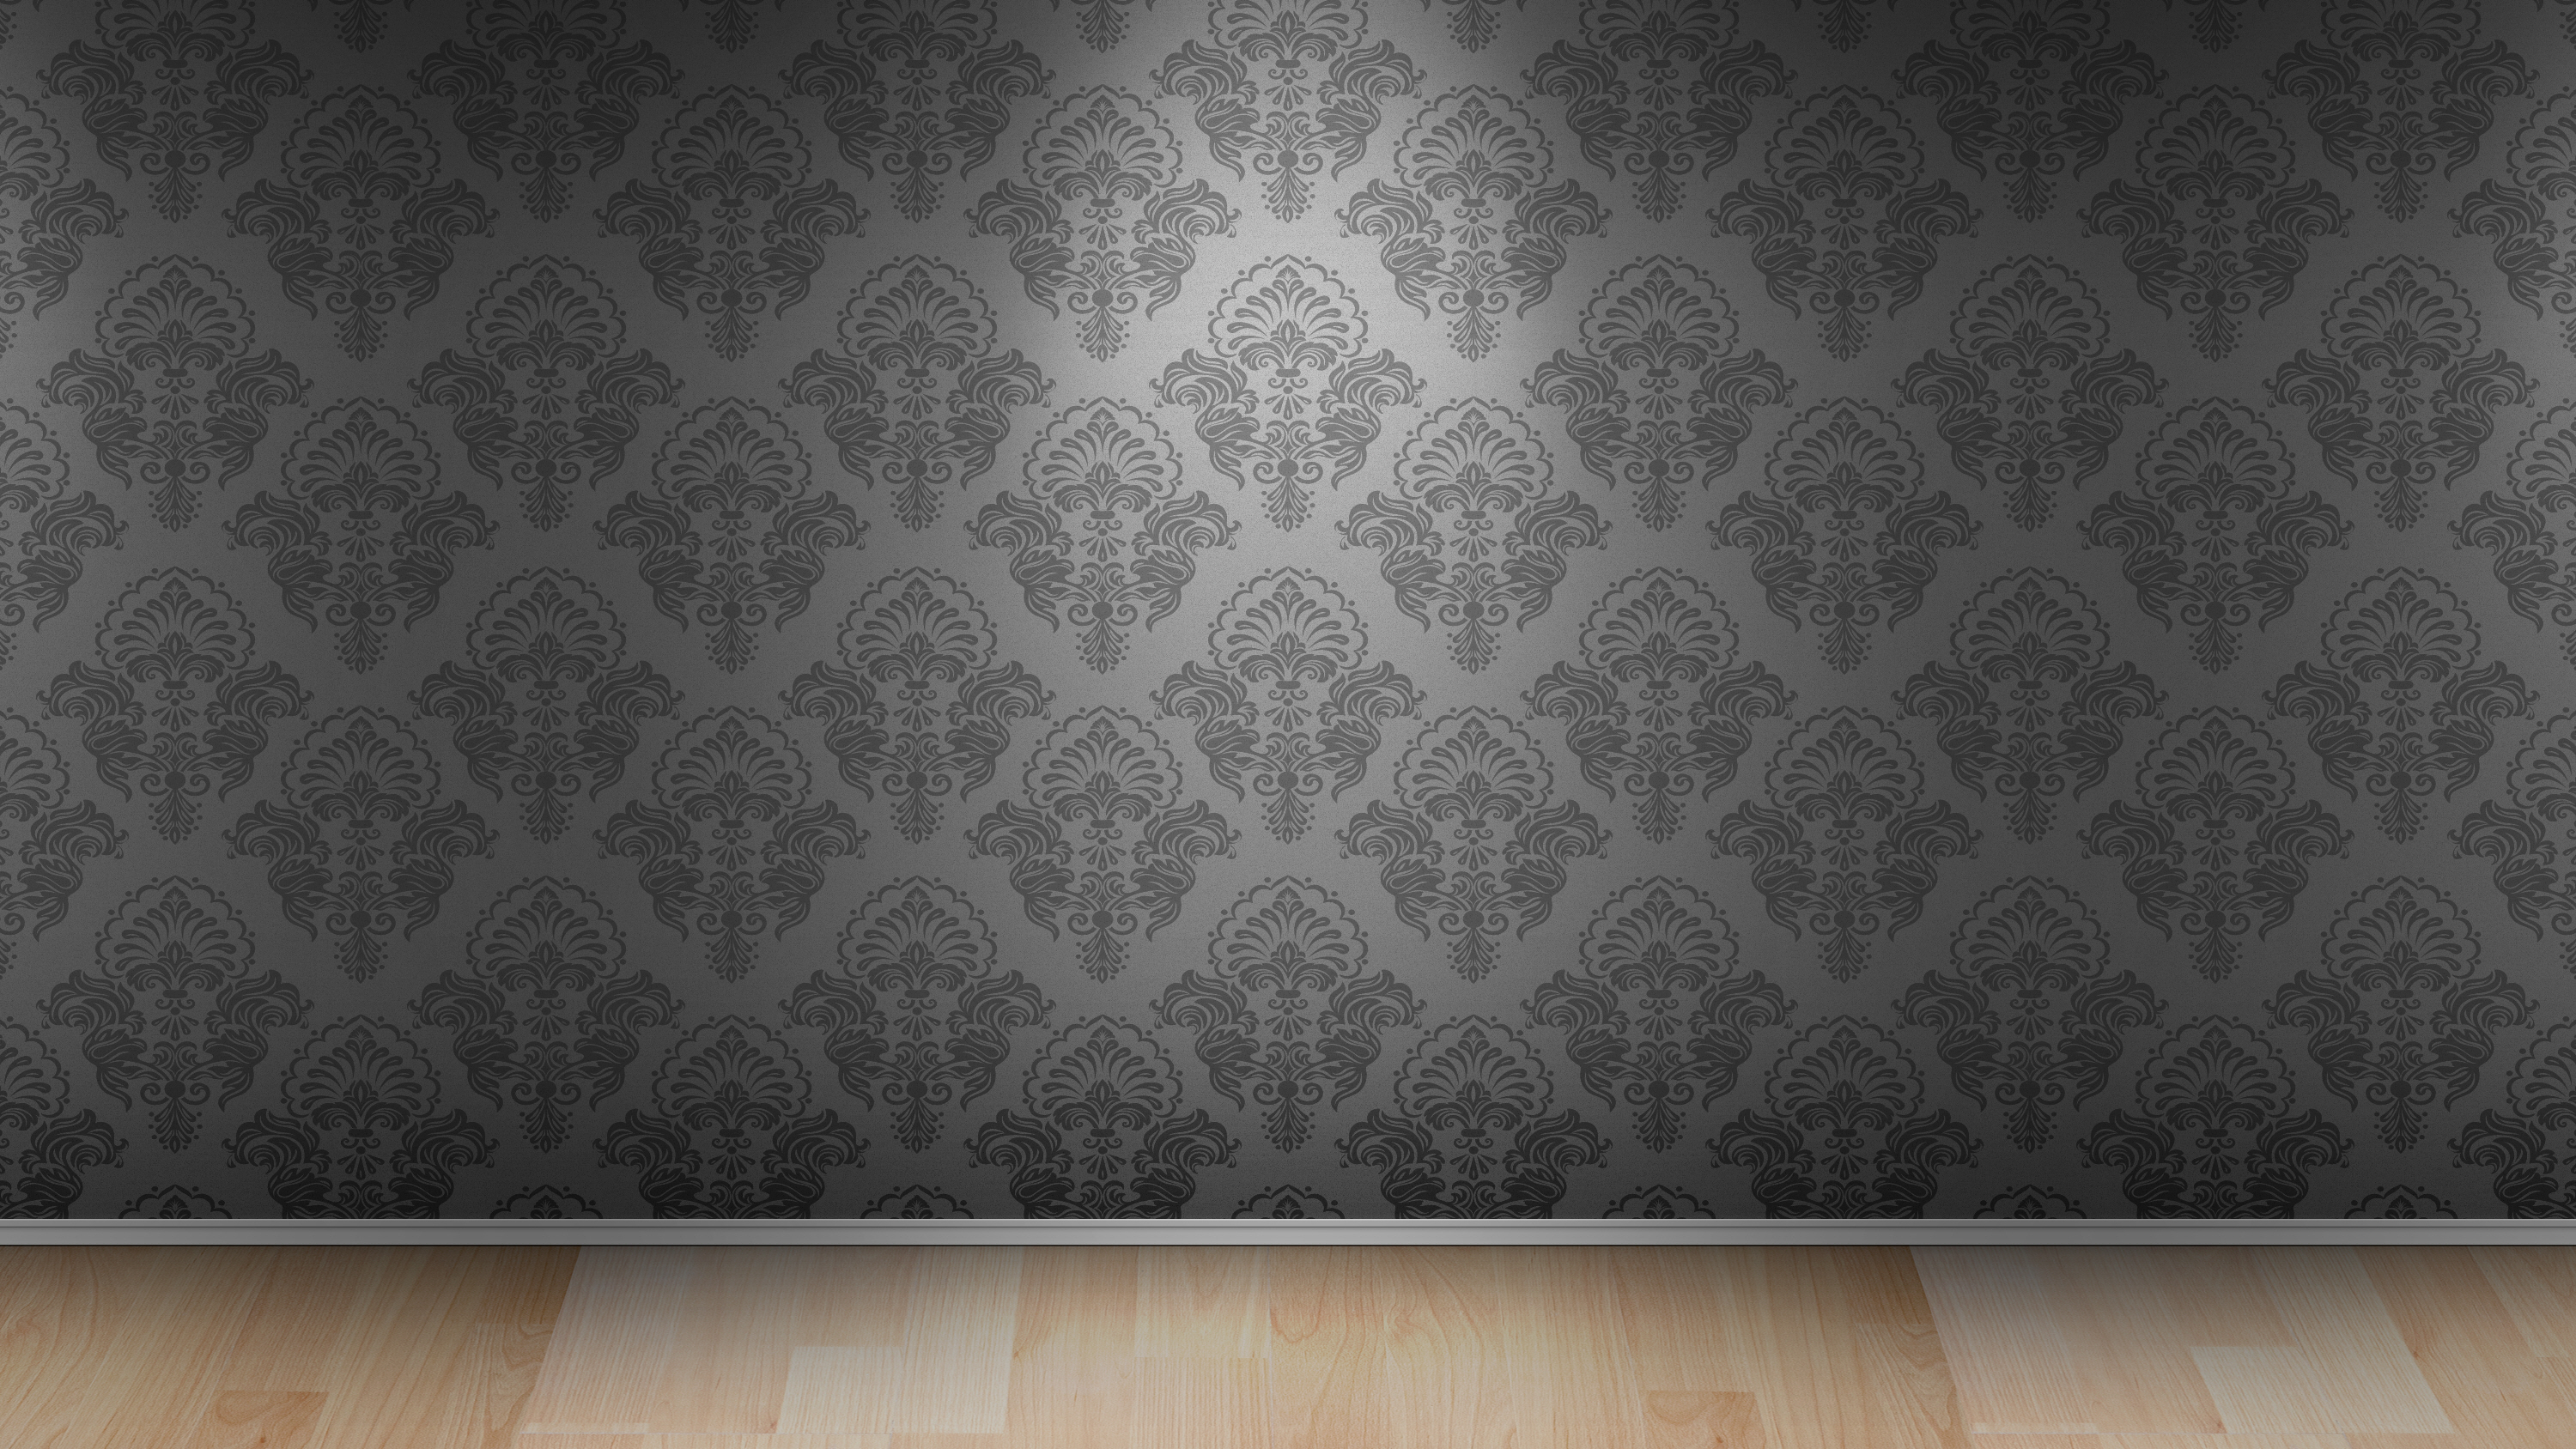 General 3000x1688 wall pattern texture gray background wooden surface